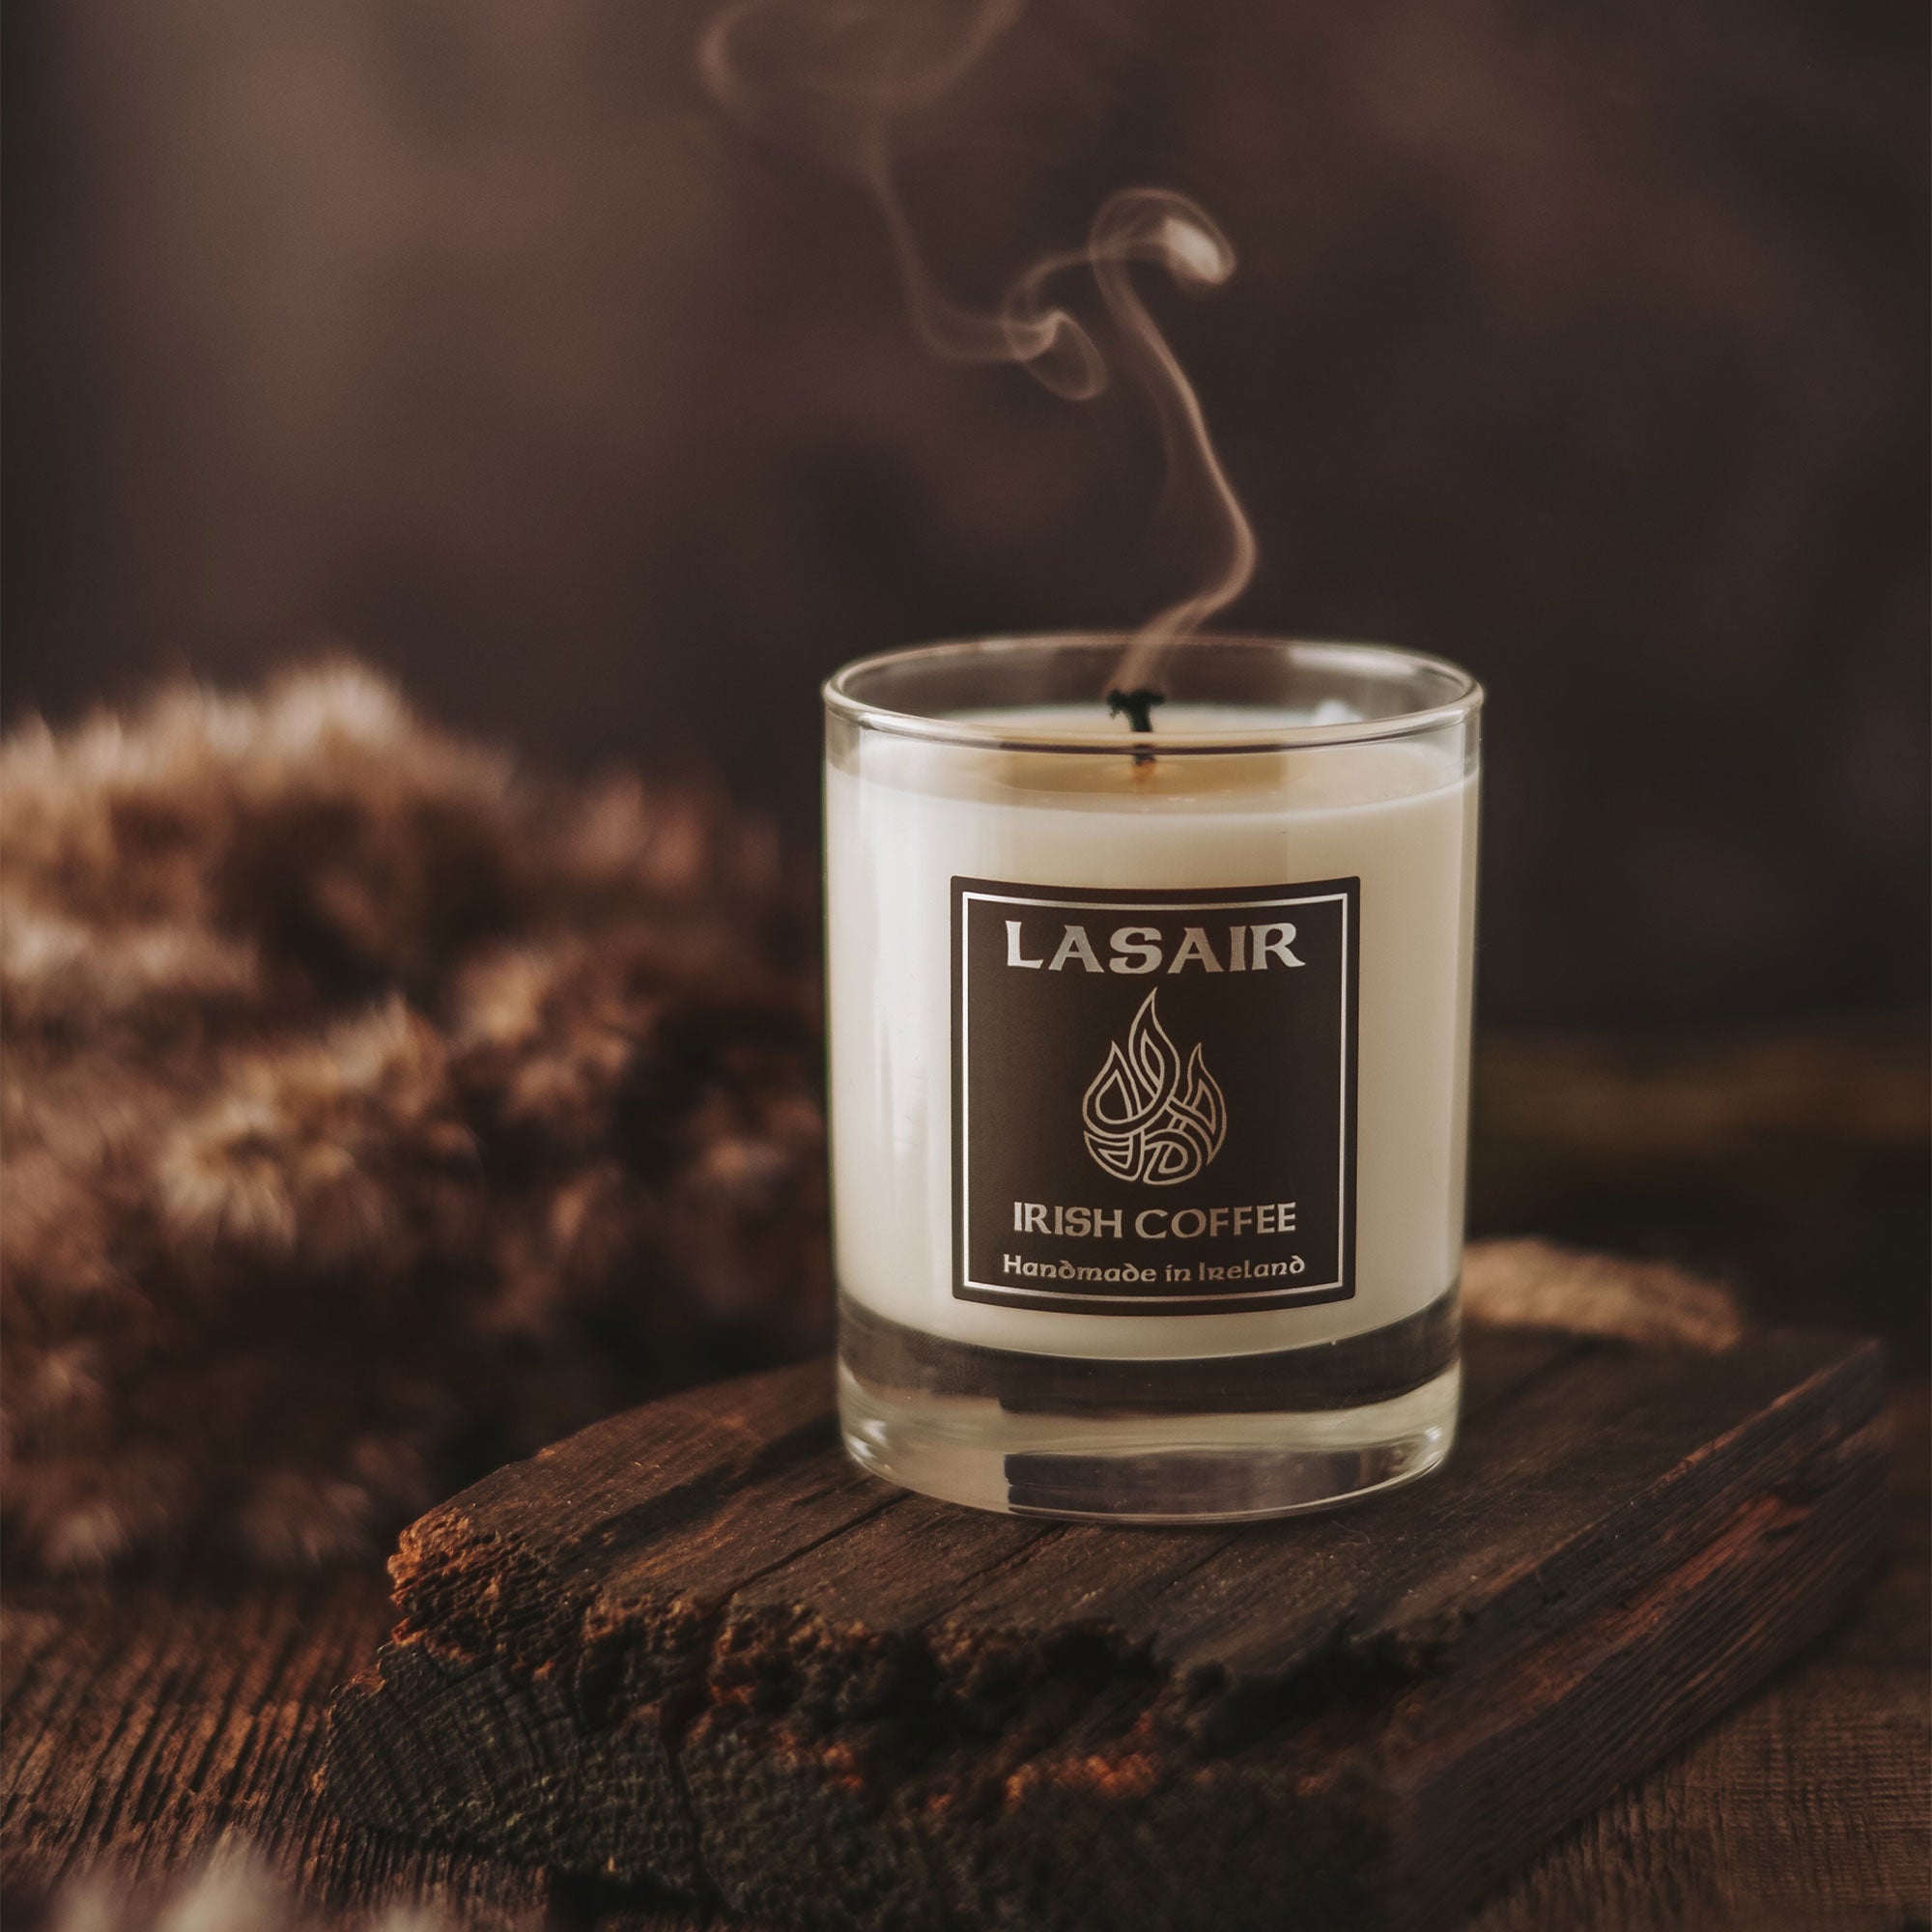 Irish Coffee Candle - Smouldering Candle Picture. Our Irish Coffee candle is the perfect gift for coffee lovers and Irish expats alike!